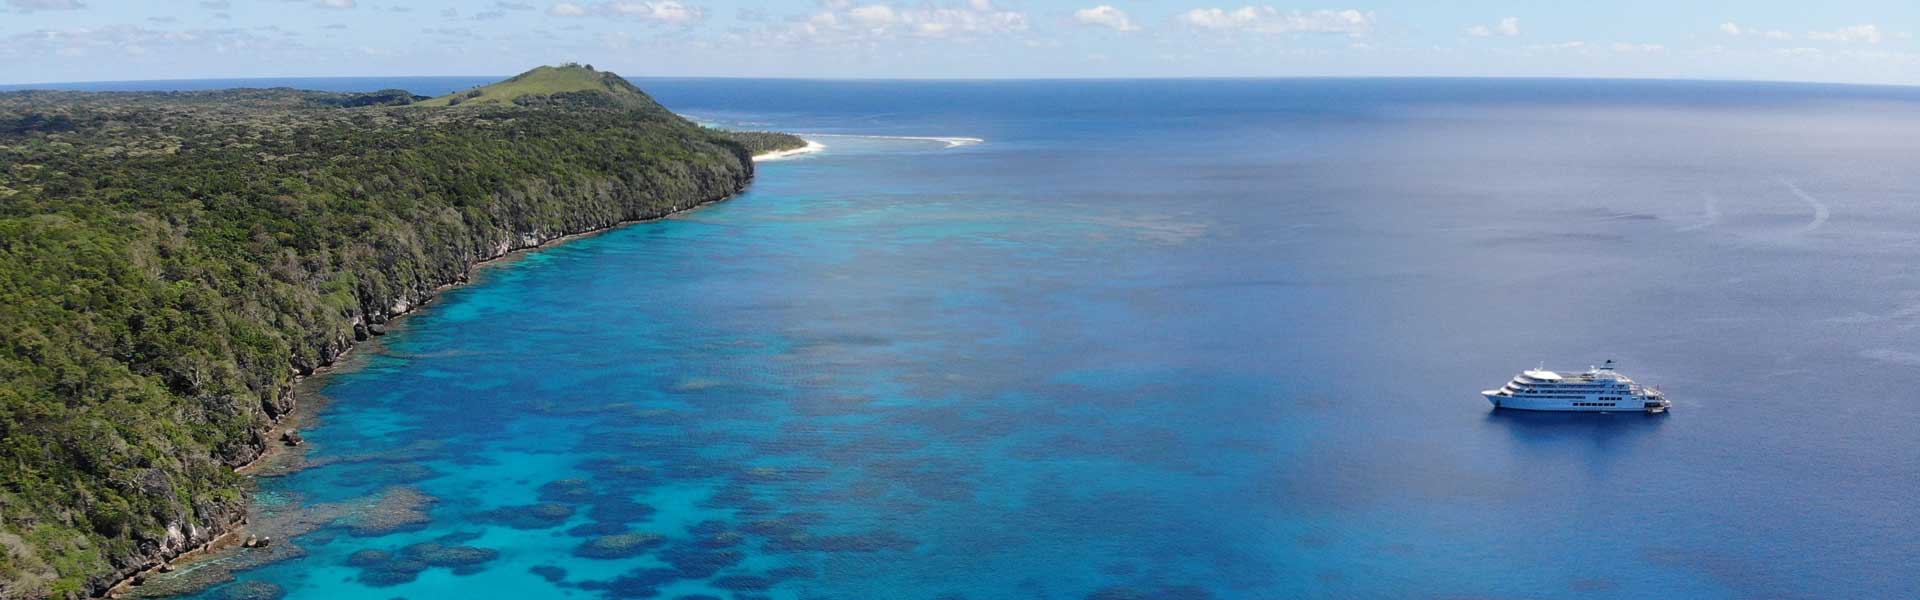 Family Cruise Package for 7 Nights in Mamanuca & Yasawa Islands with Flights, Transfers and More!